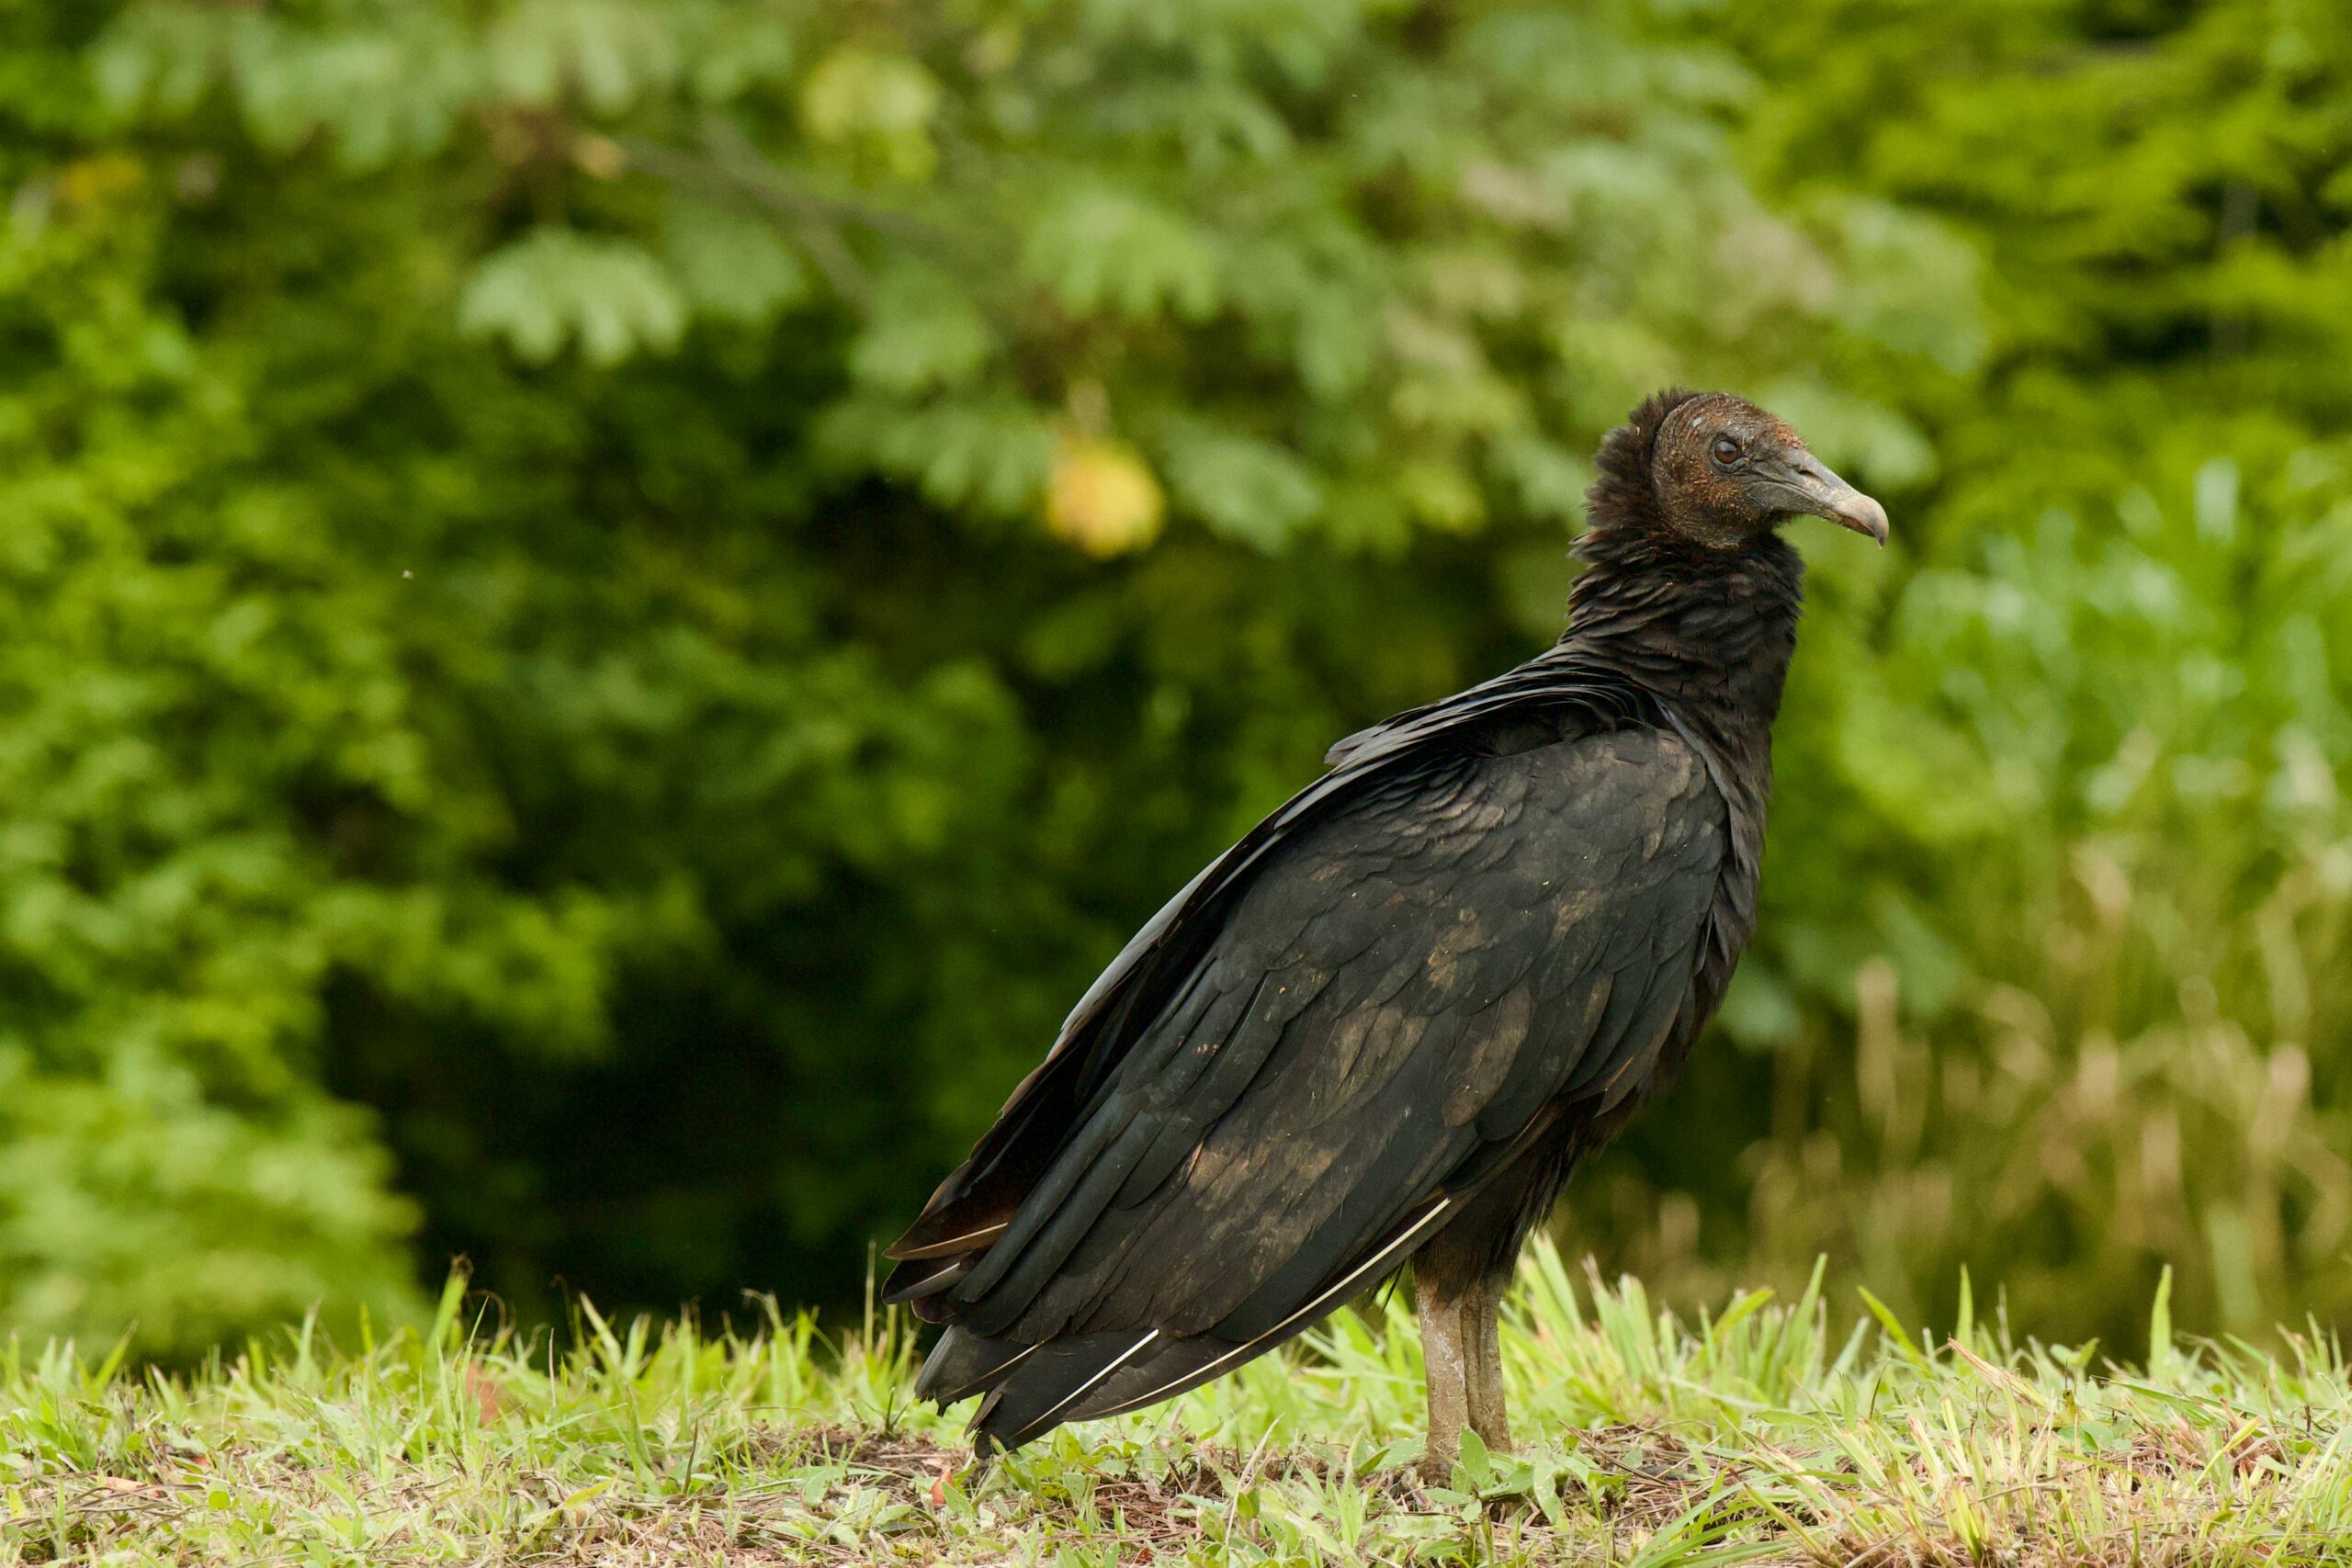 Seeing a Black Vulture: Spiritual Meaning